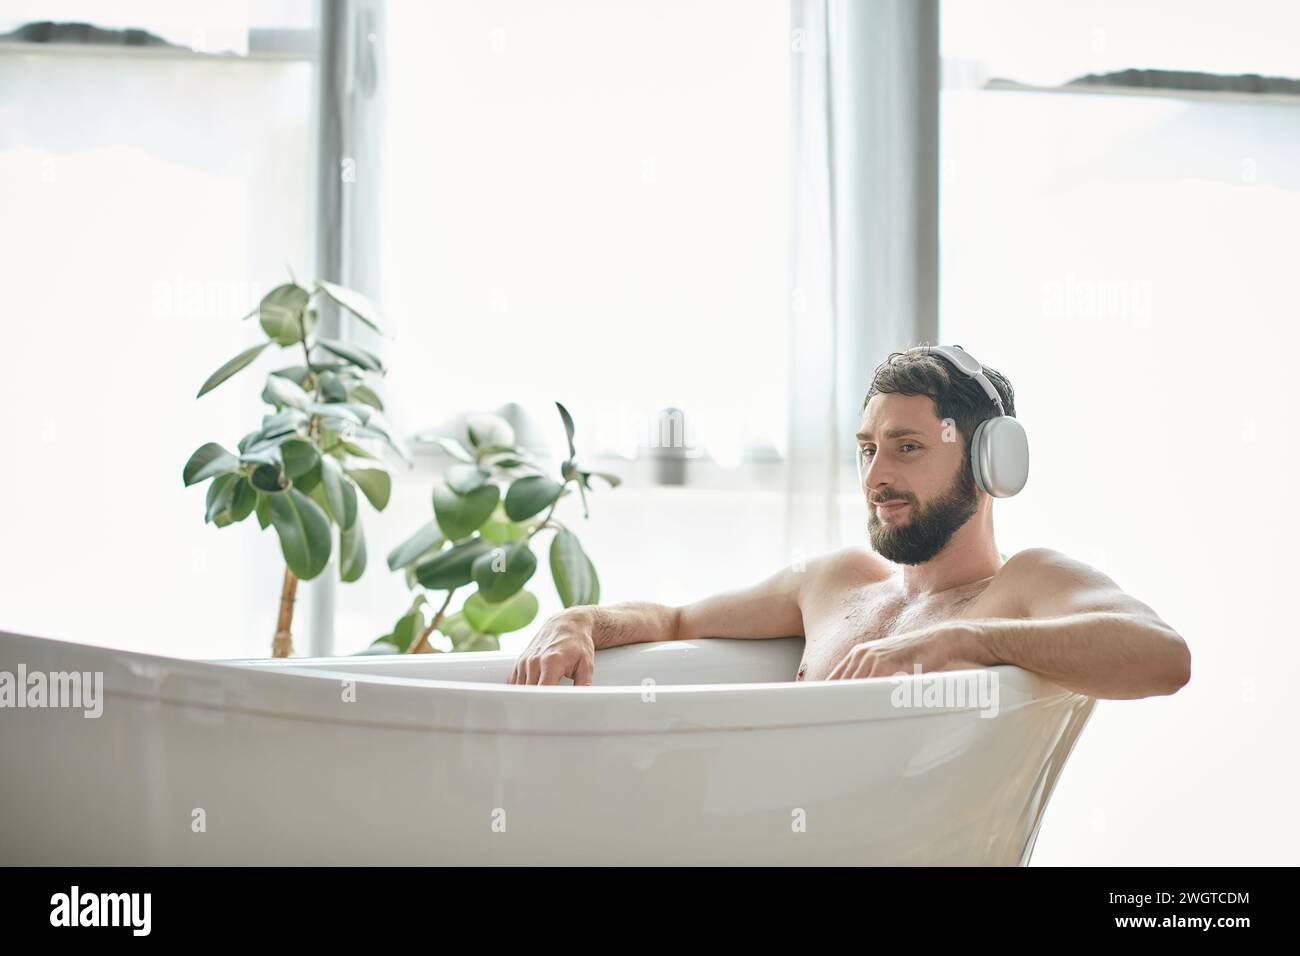 jolly good looking man with beard and headphones sitting and relaxing in his bathtub, mental health Stock Photo